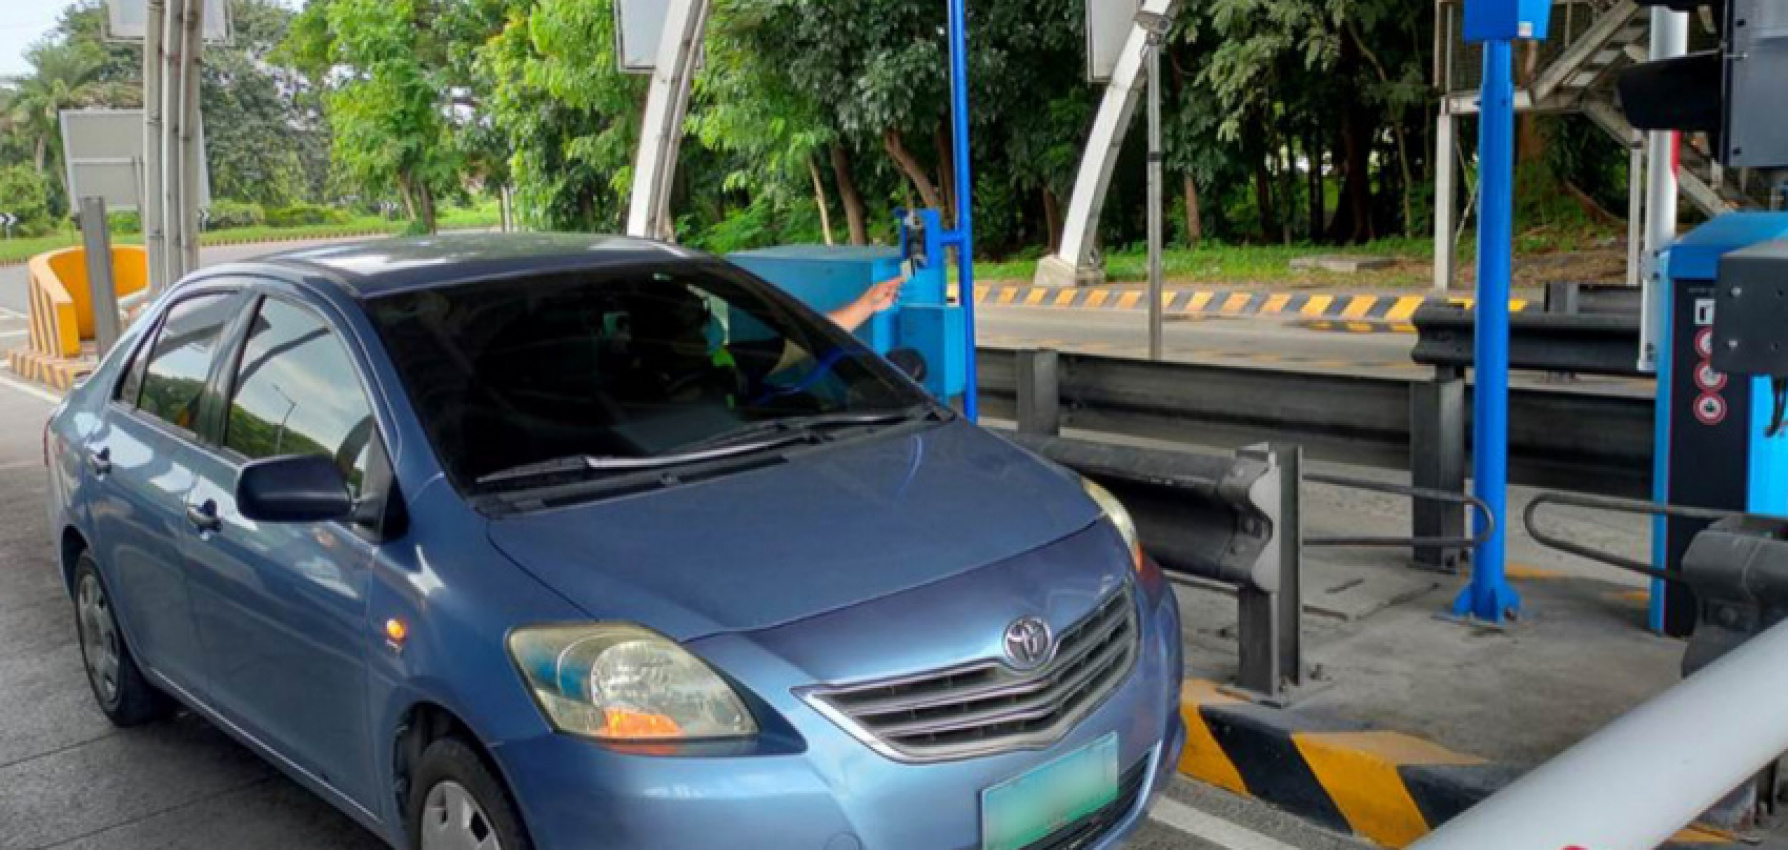 auto news, autos, cars, easytrip, nlex, nlex corporation, rfid, nlex to put more early rfid scanners, card readers on toll lanes